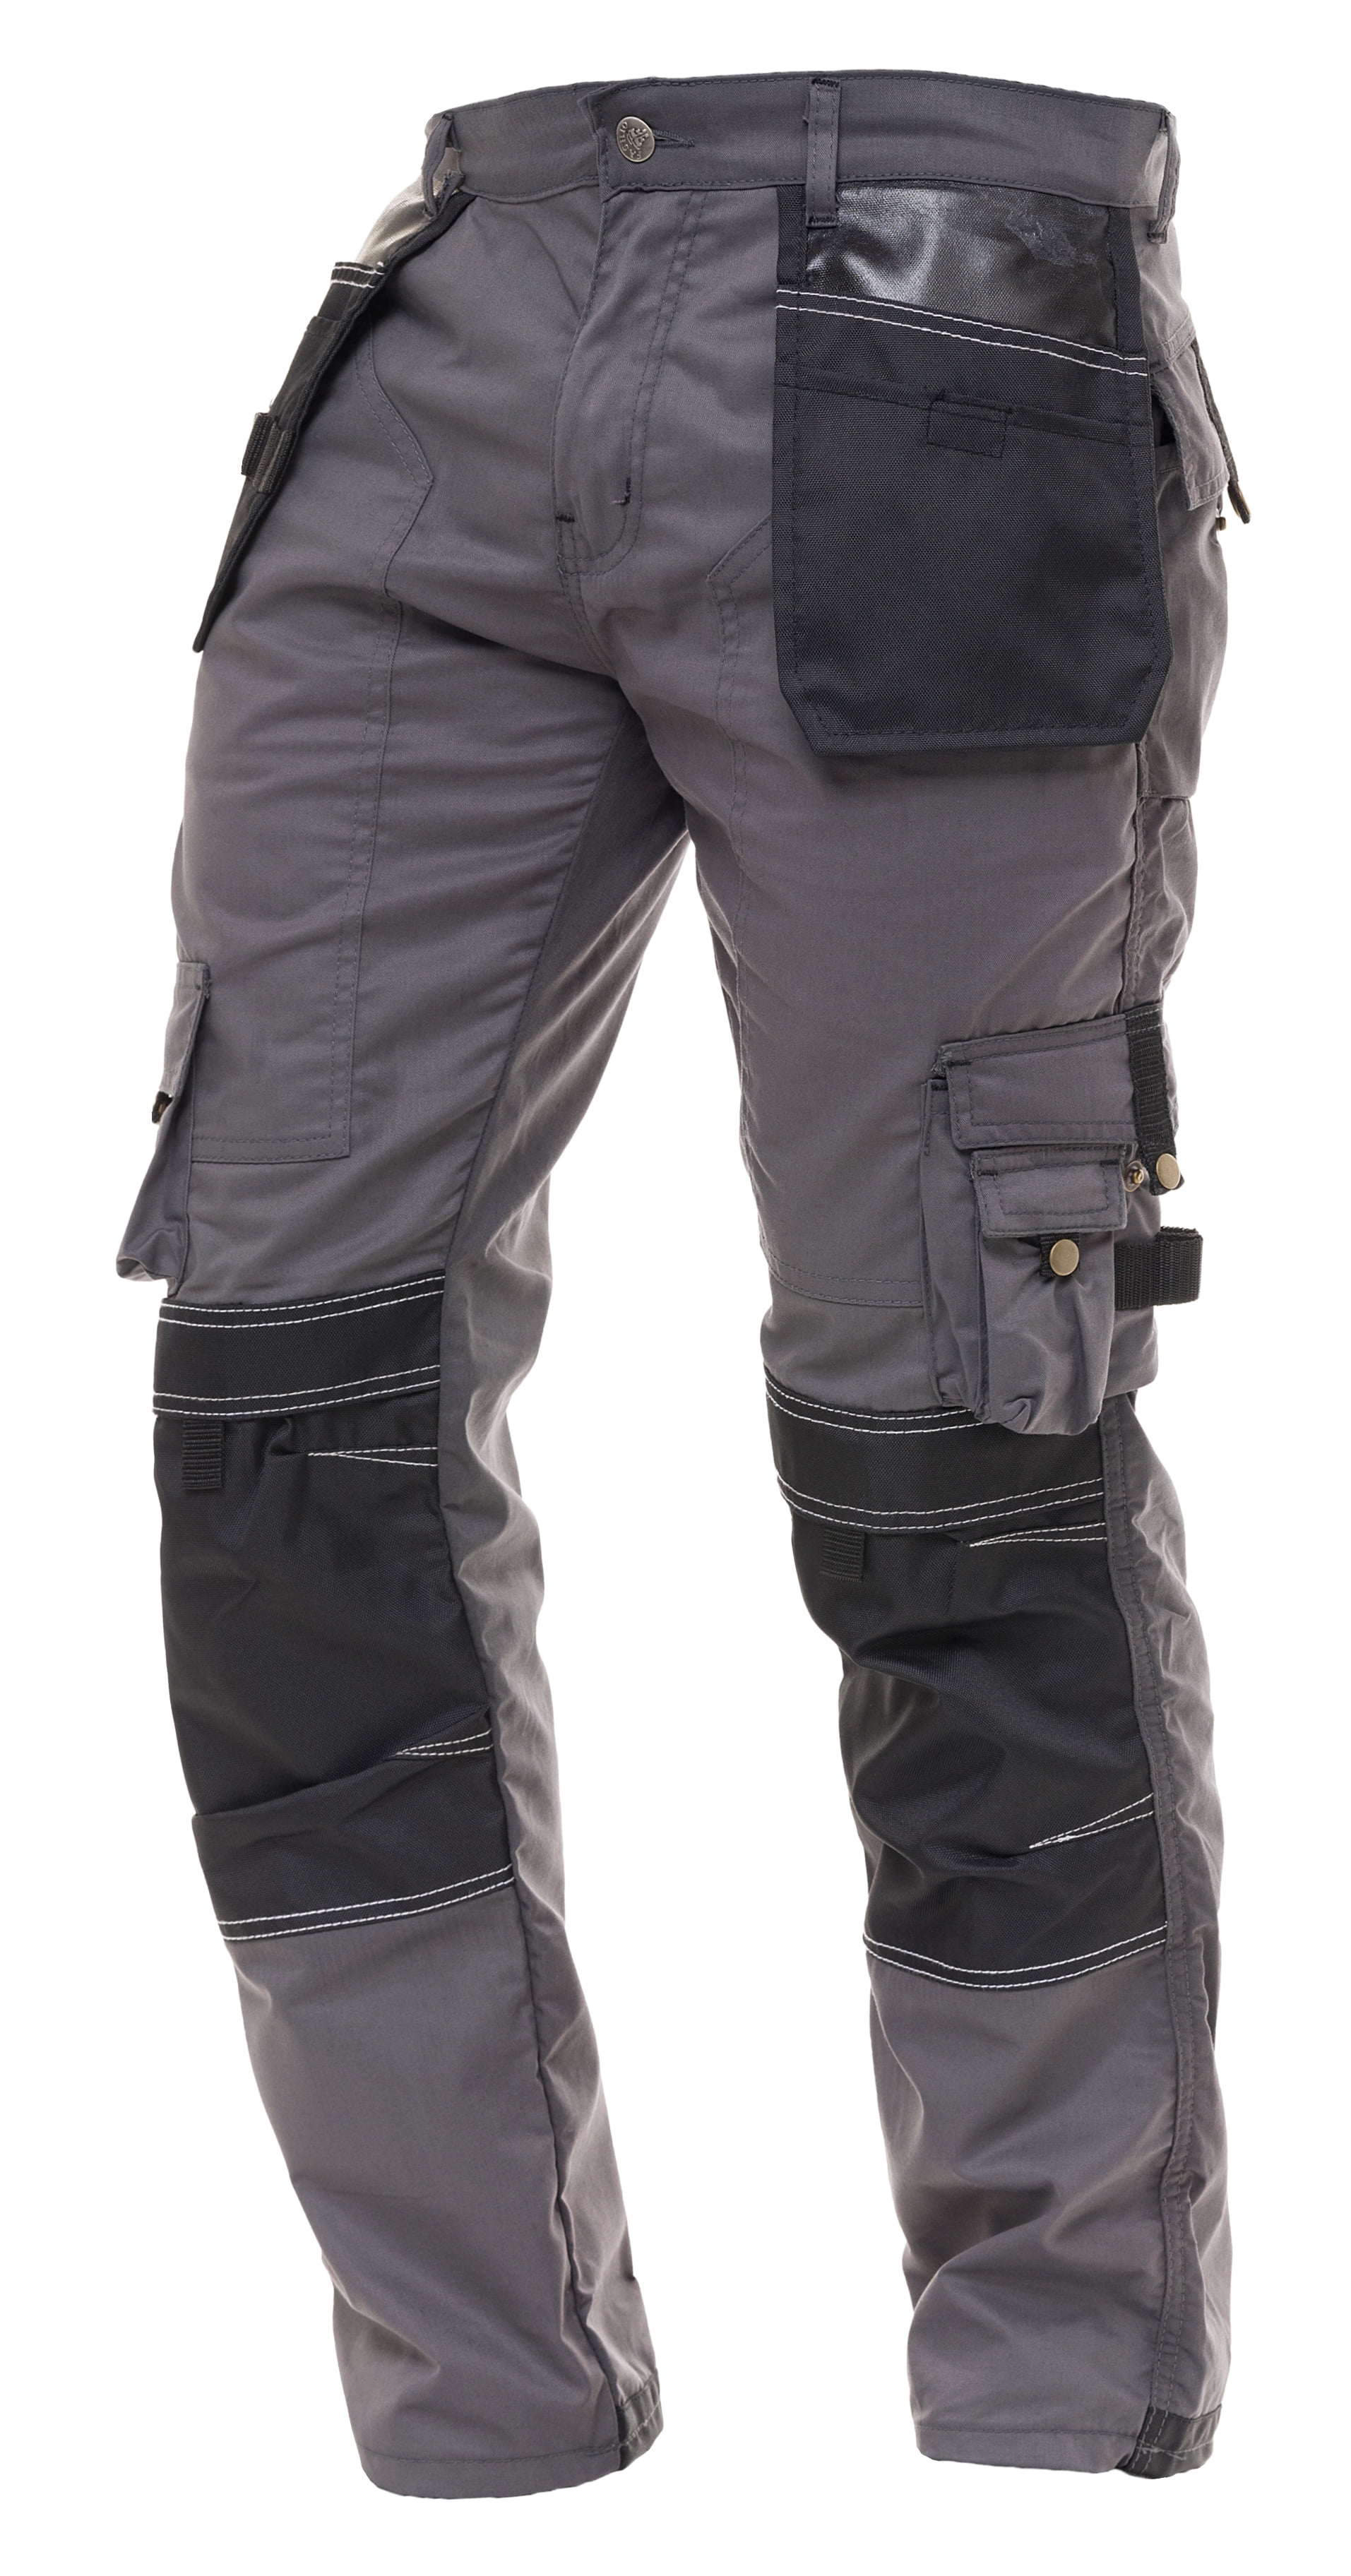 ELEVEN Workwear Chizeled Cargo Knee Protection Work Pant